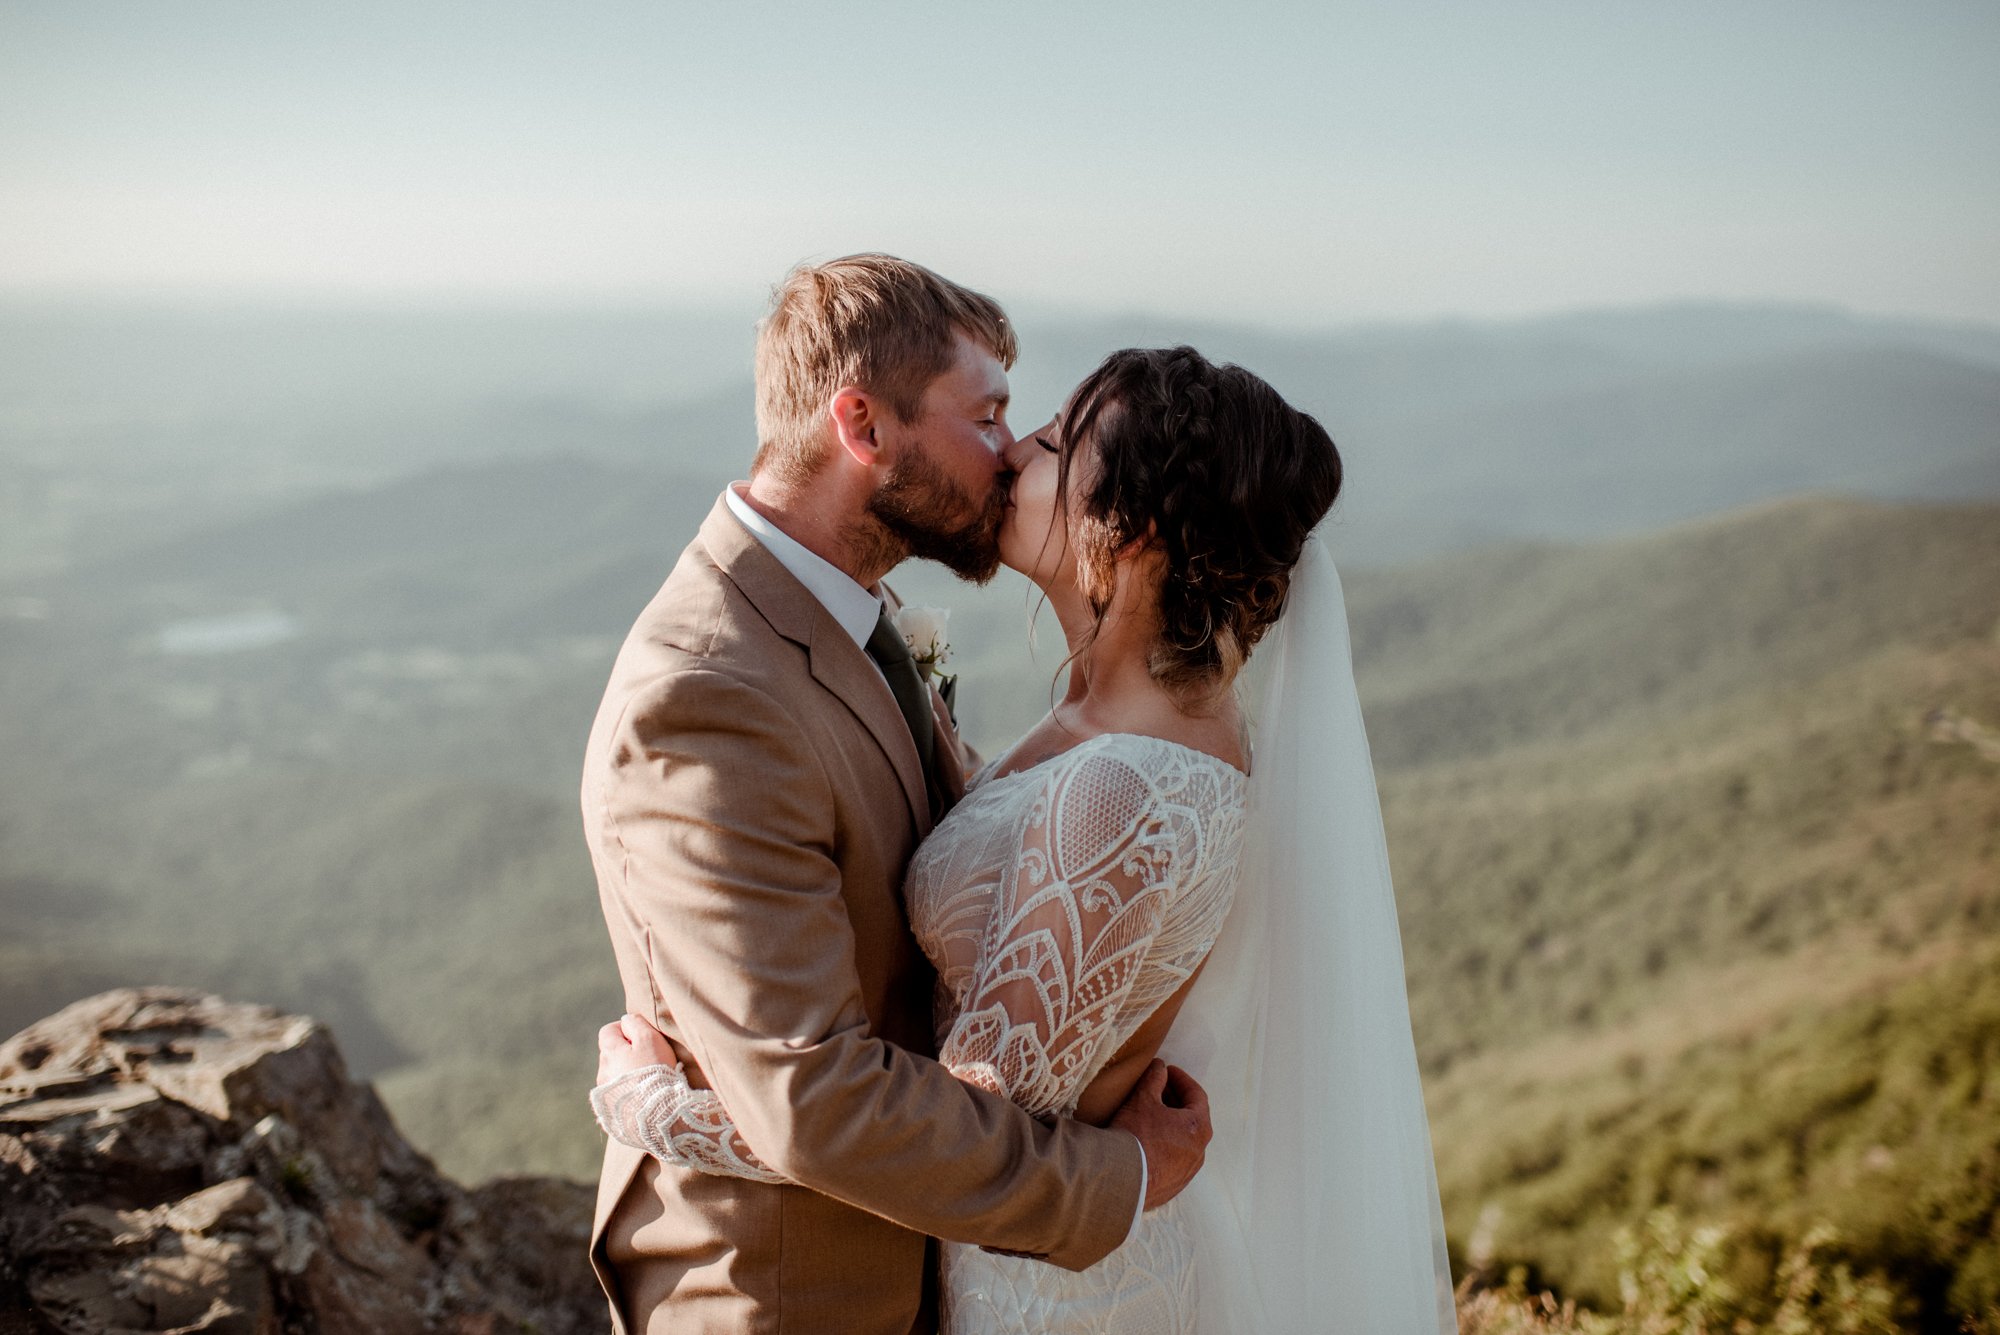 Sunset Elopement on Stony Man Summit in Shenandoah National Park - White Sails Creative Elopement Photography - July Elopement on the Blue Ridge Parkway_38.jpg